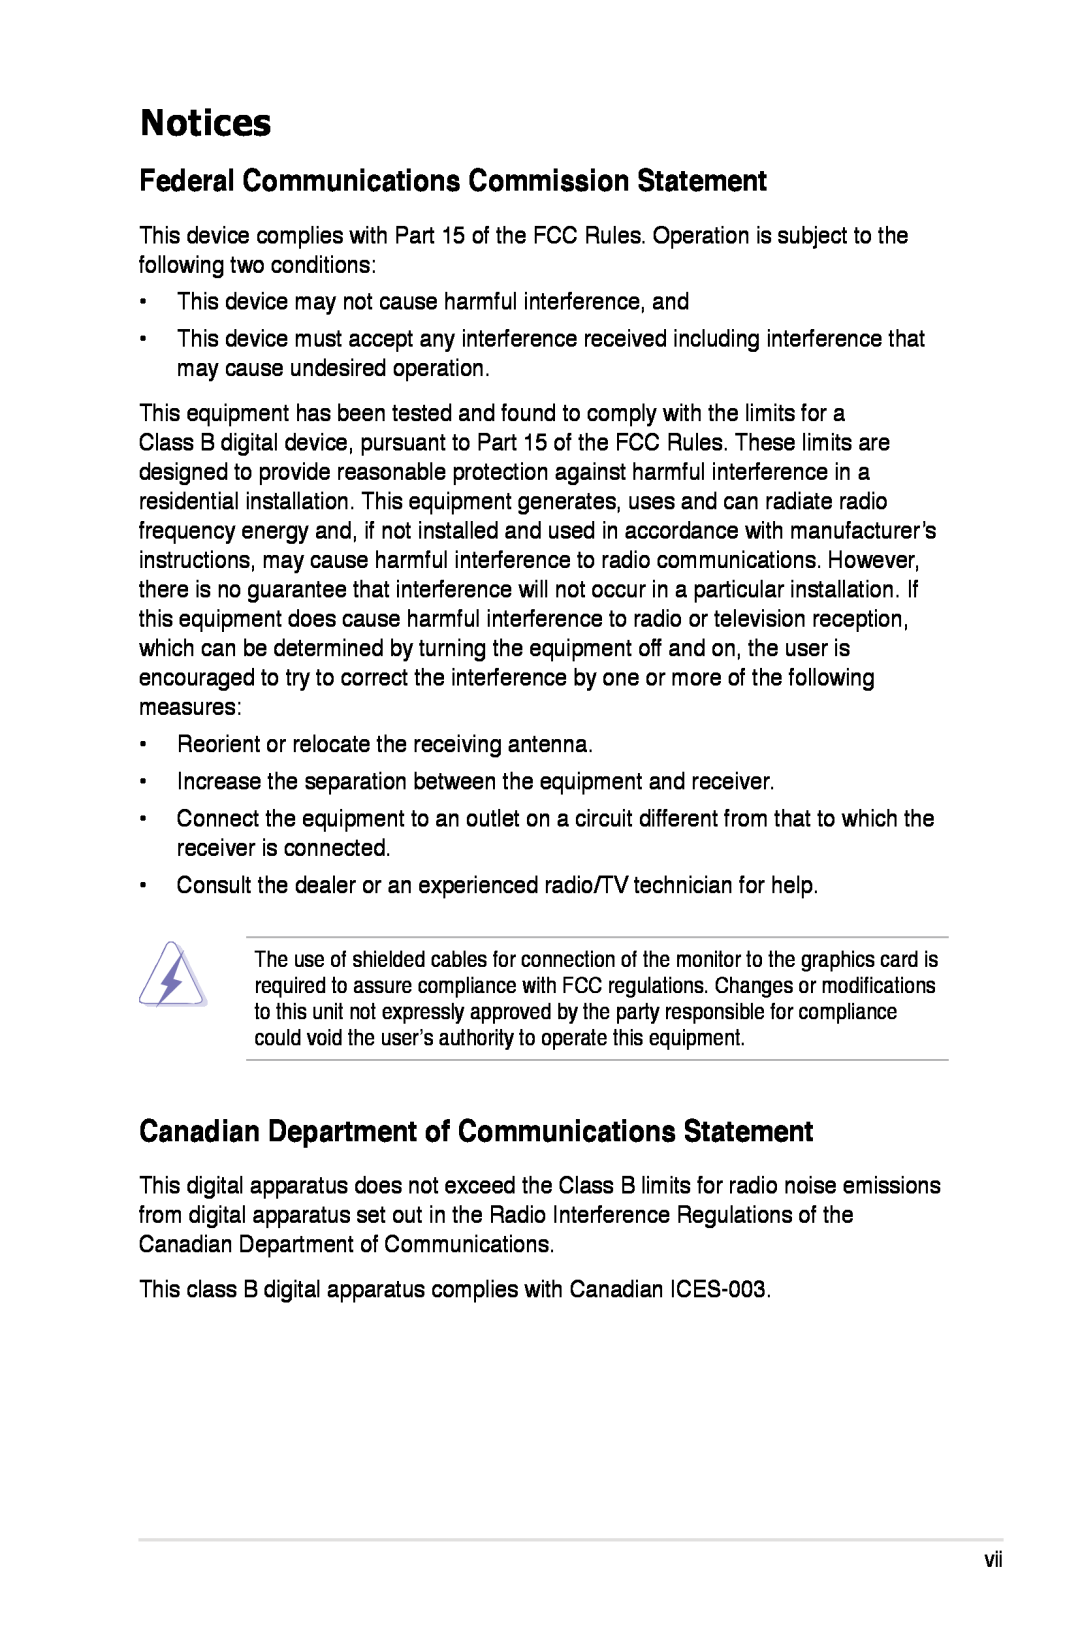 Asus P5K/EPU manual Notices, Federal Communications Commission Statement, Canadian Department of Communications Statement 